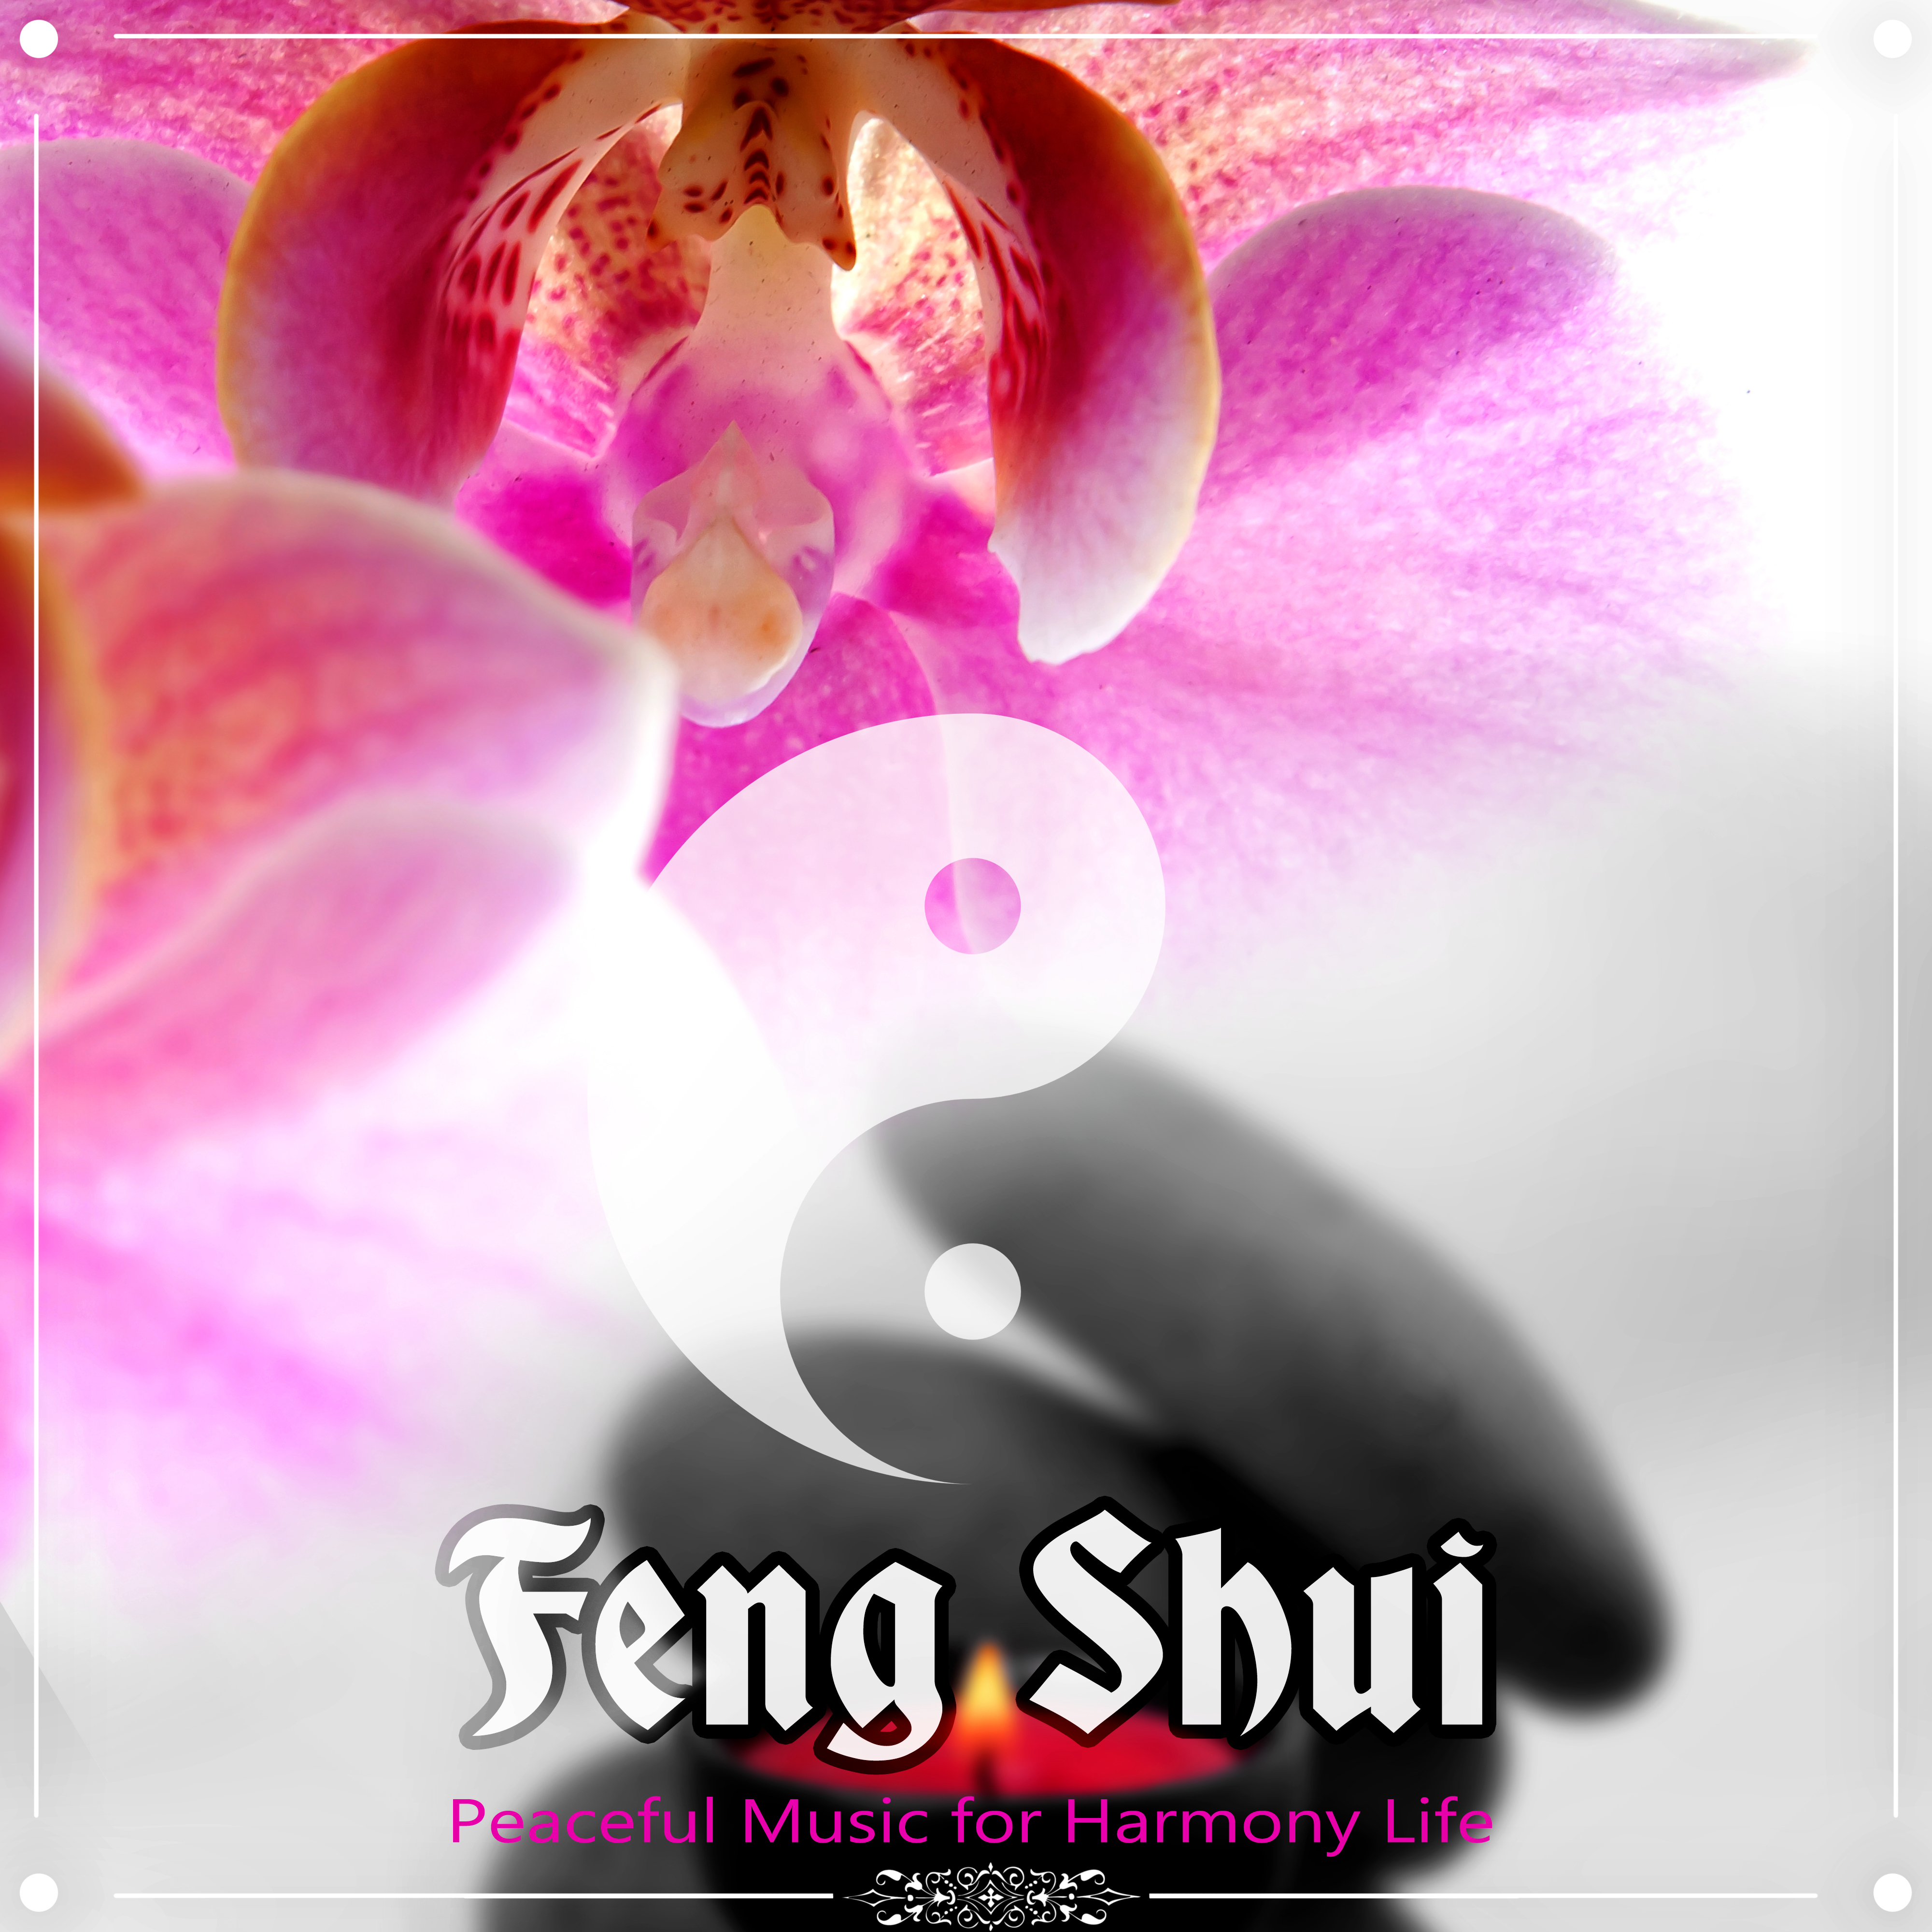 Feng Shui - Peaceful Healing Music for Harmony Life, Relaxing Songs for Therapy, Meditation, Wellness & Spa